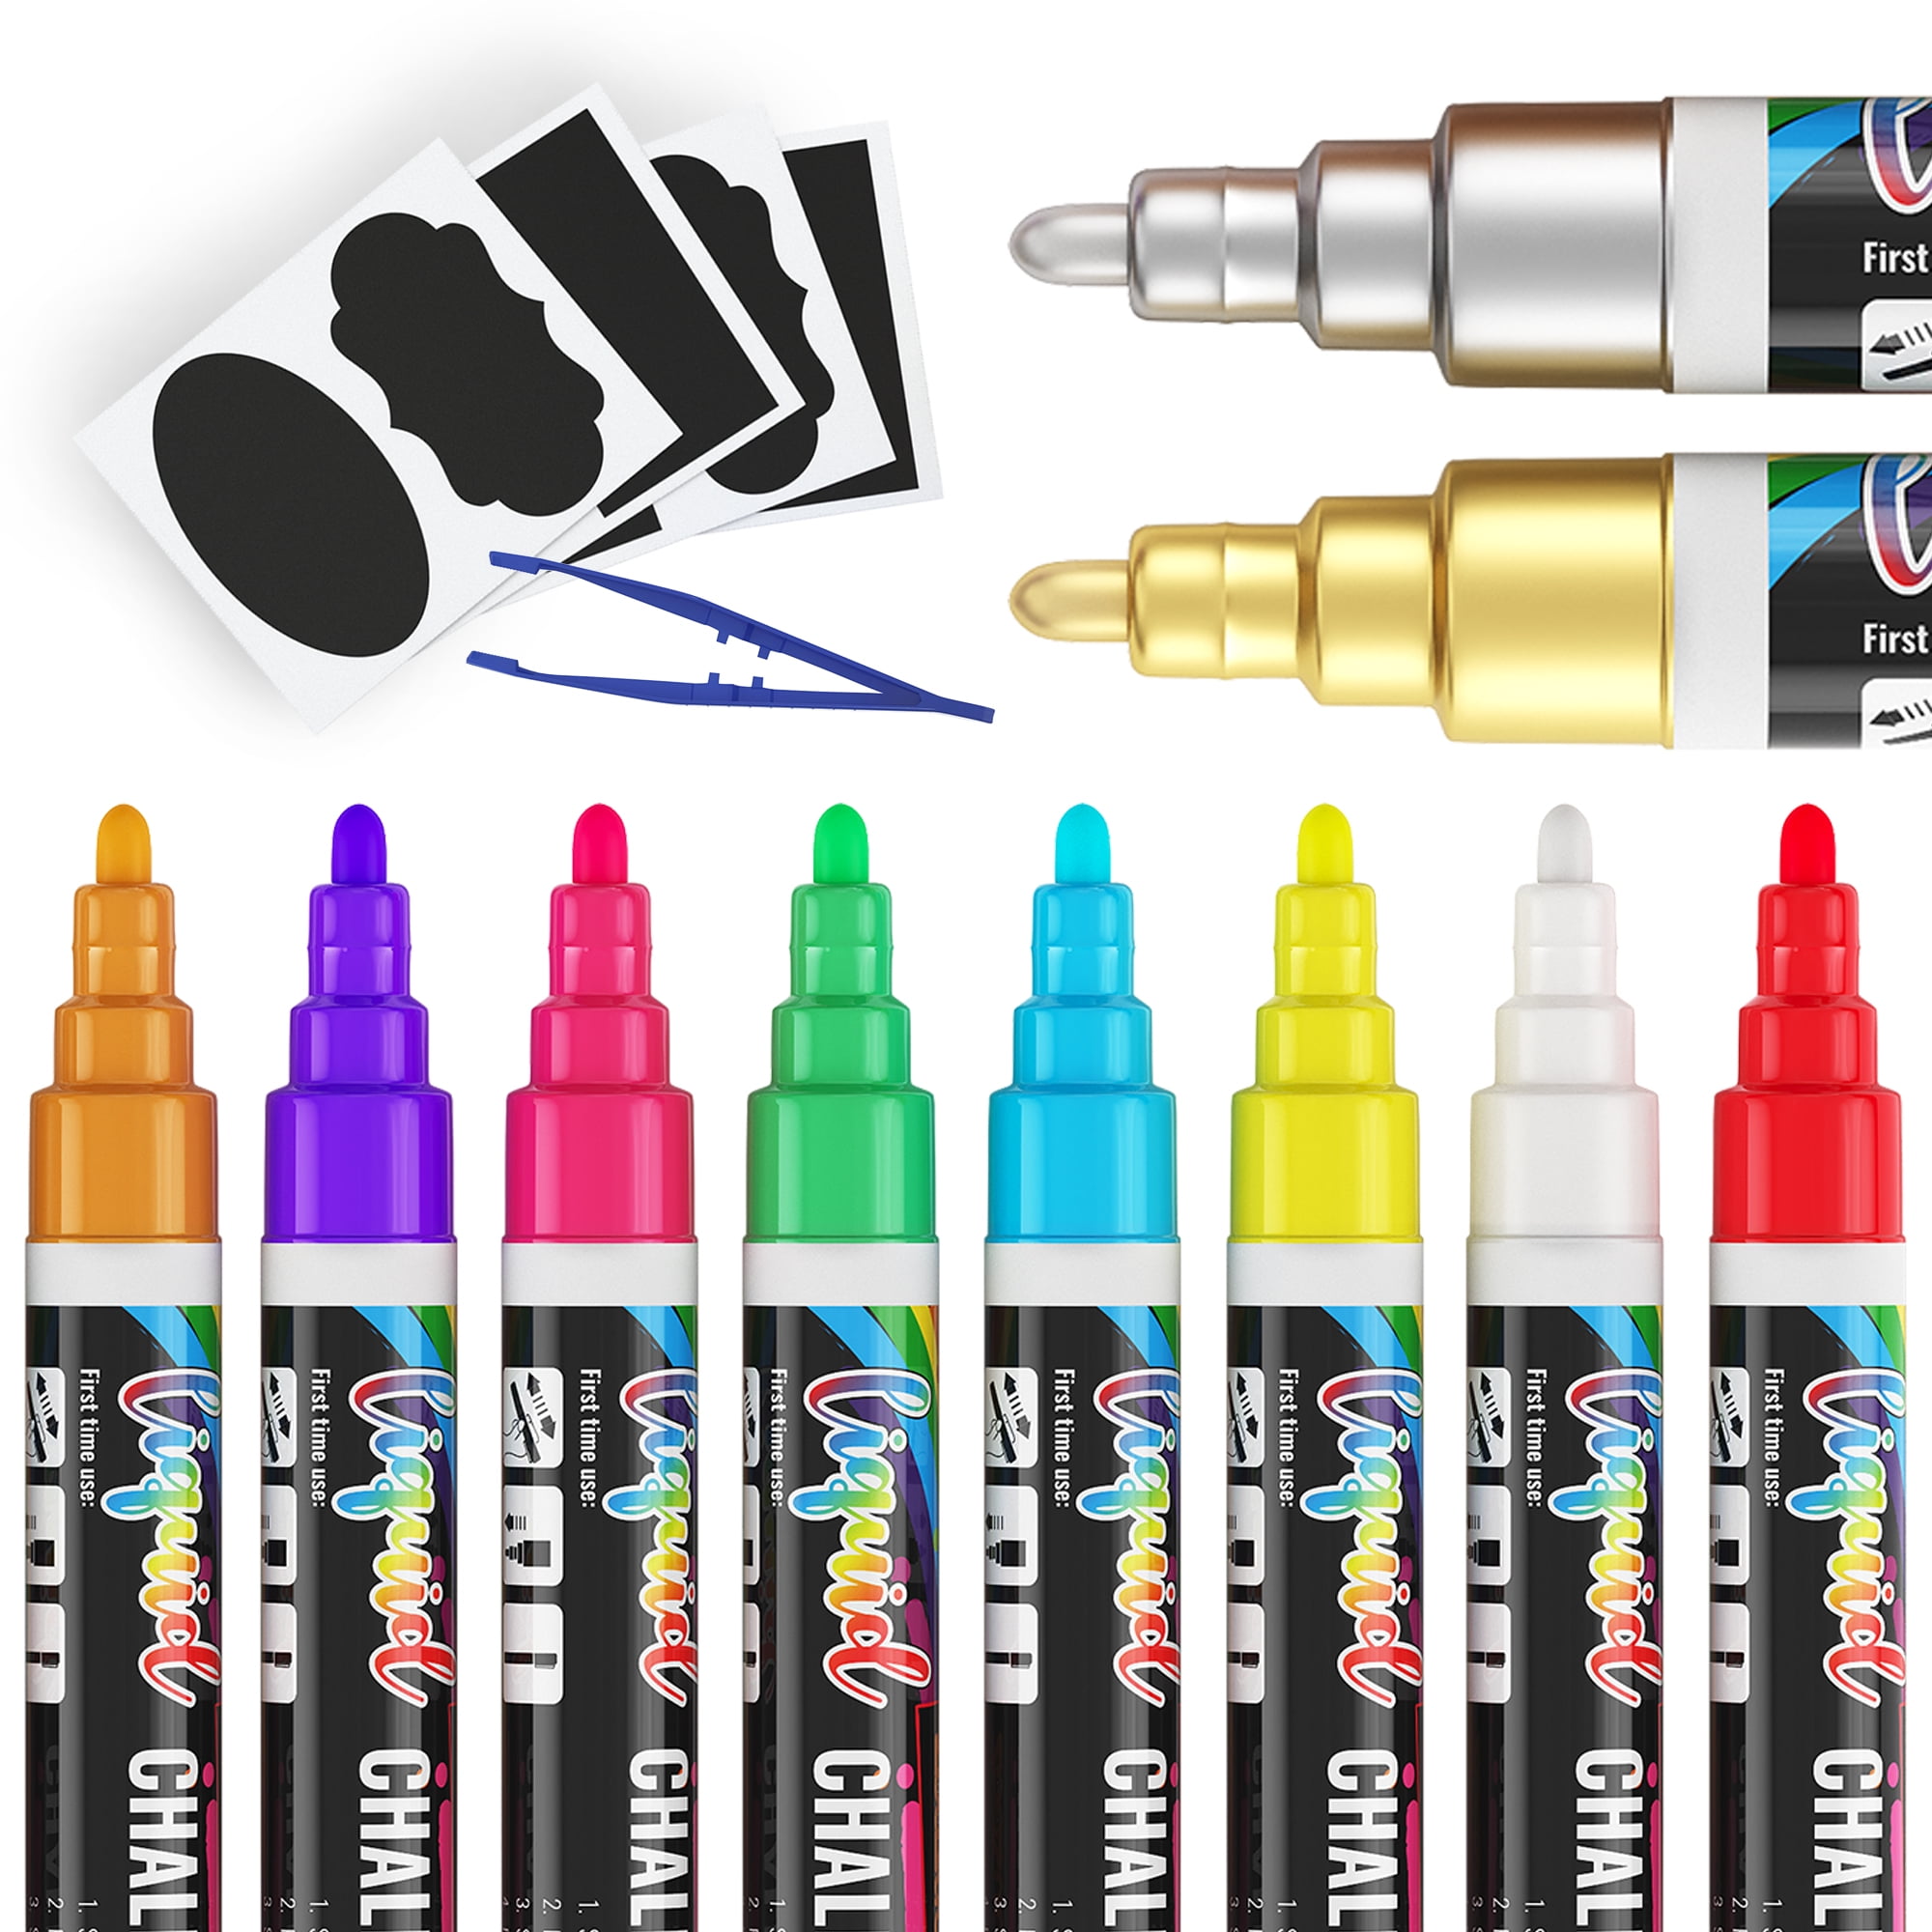  GOTIDEAL Liquid Chalk Markers, Fine Tip 8 Colors Washable  Window Chalkboard Glass Pens, Paint and Drawing for Car, Blackboard, &  Bistro,Kids and Adults, Non-Toxic,Wet Erase - Reversible Tip : Office